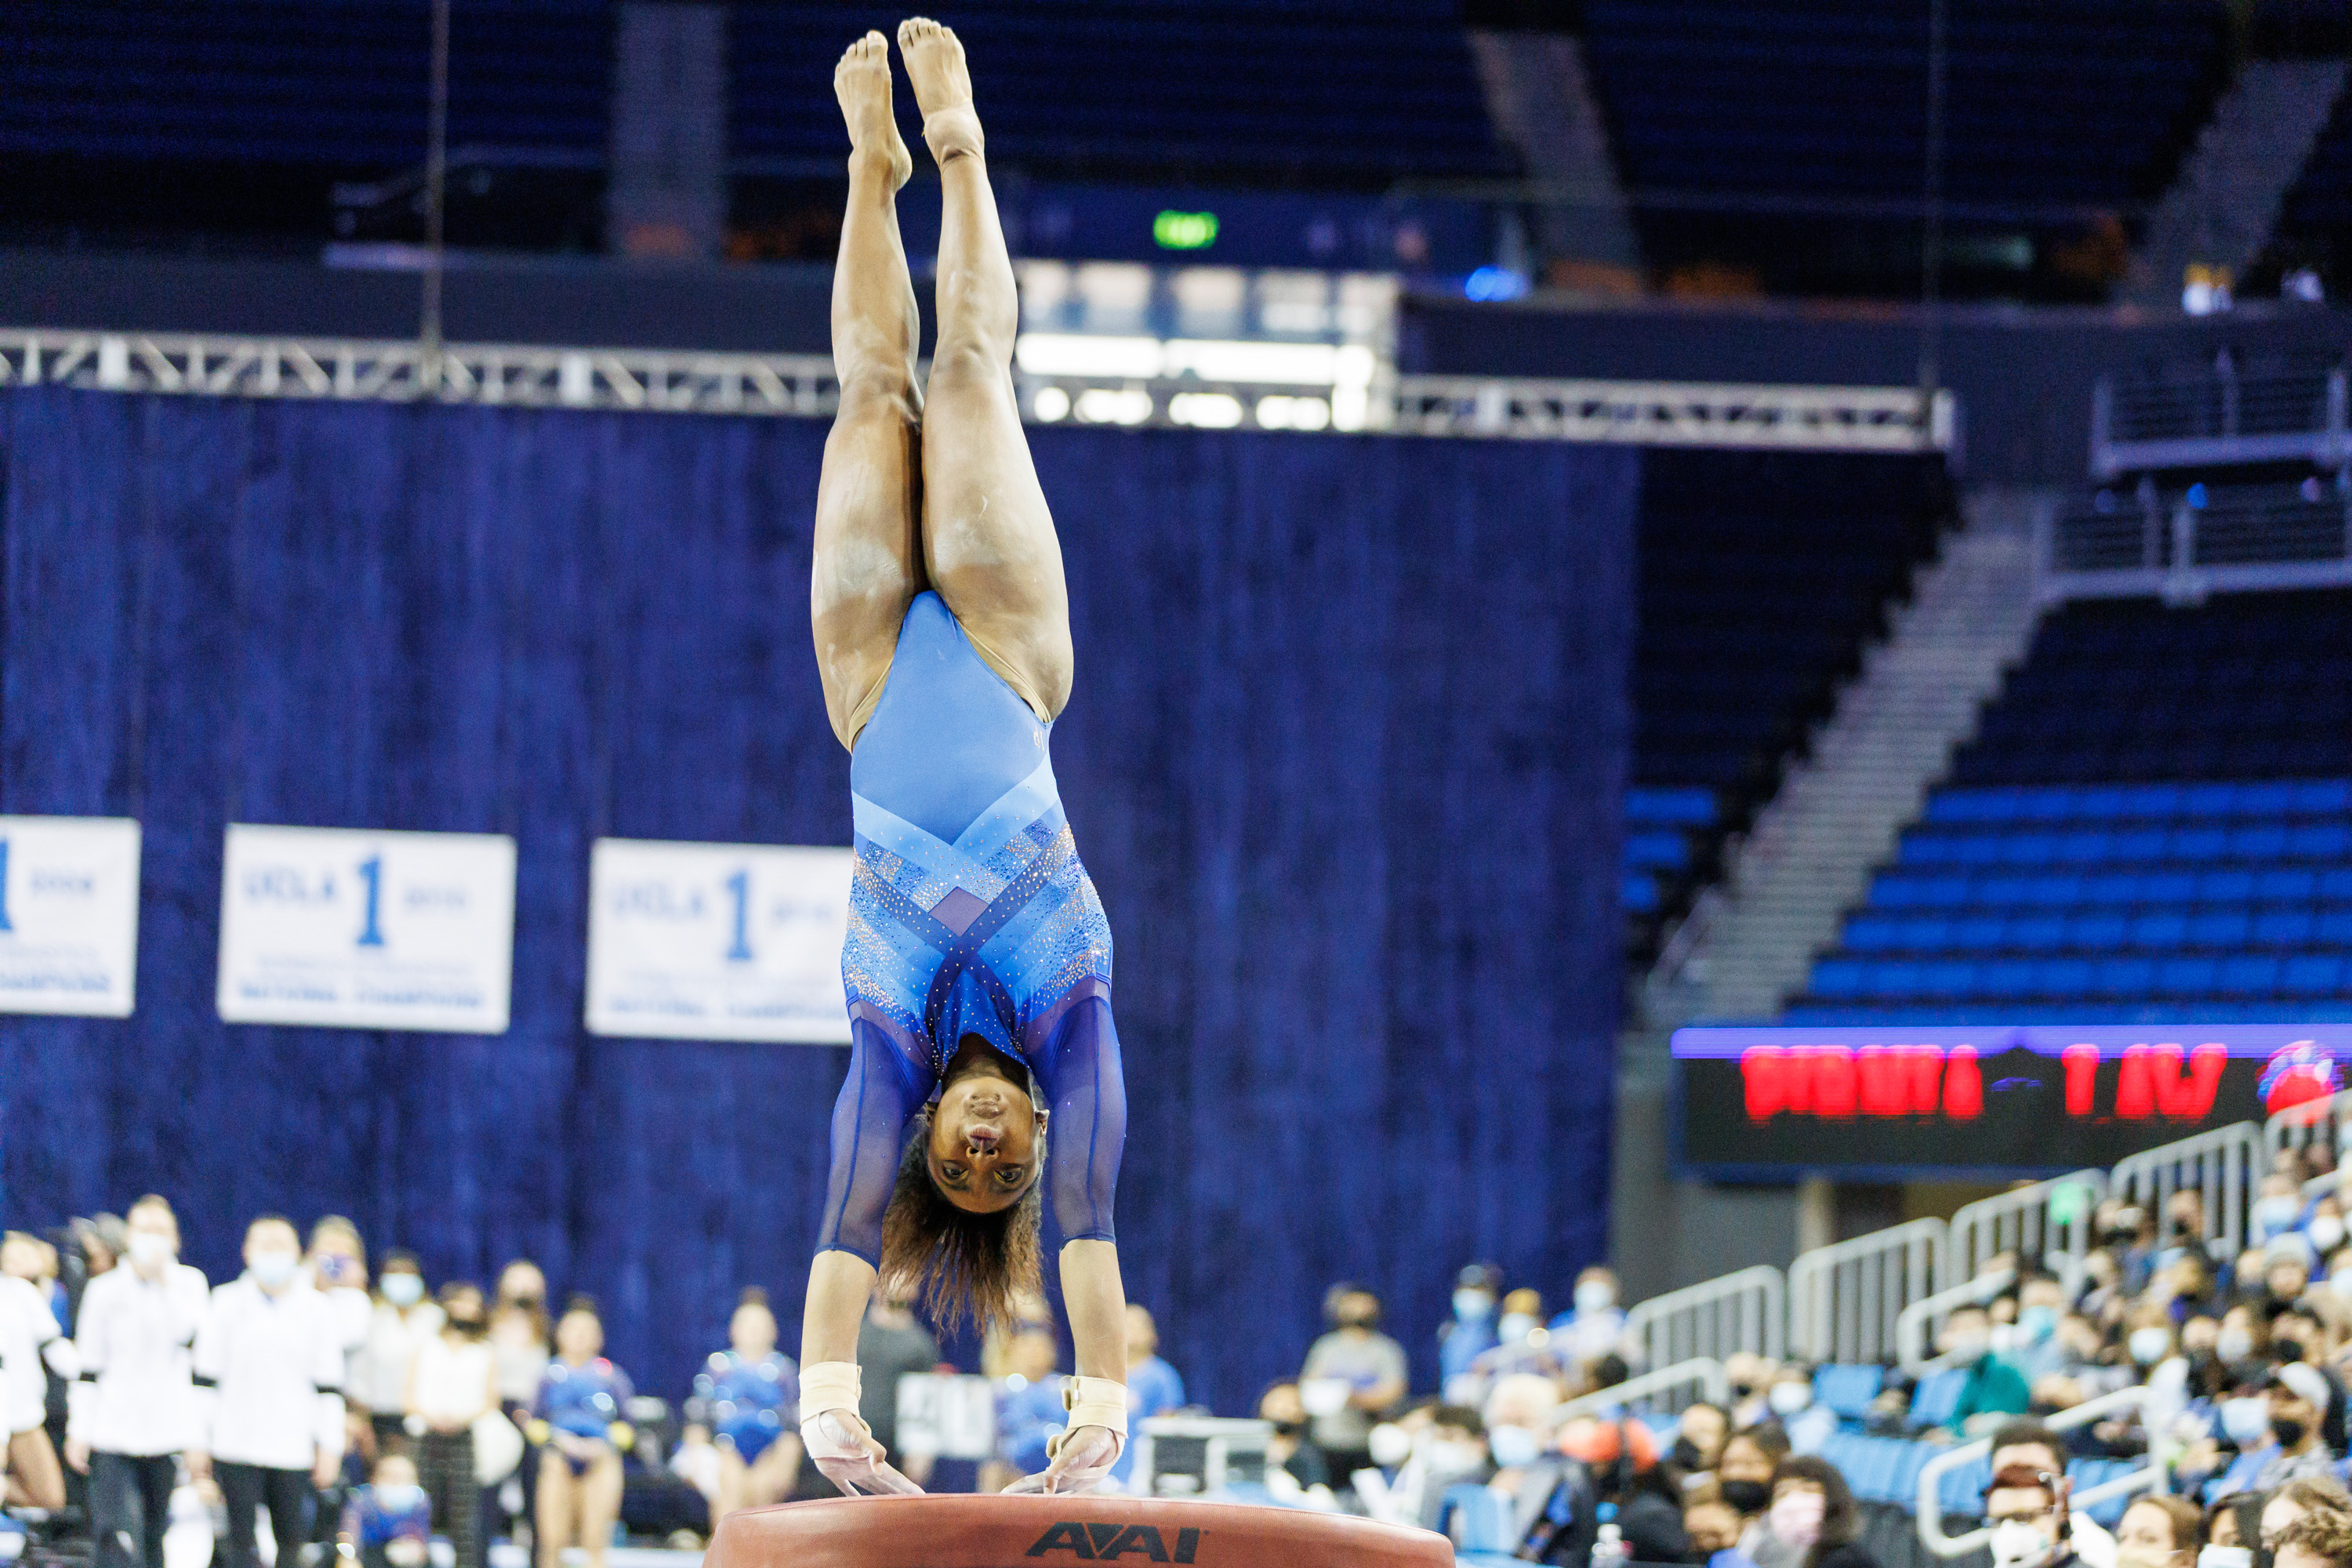 UCLA Gymnastics on X: ❗ Reminder for those of you coming to